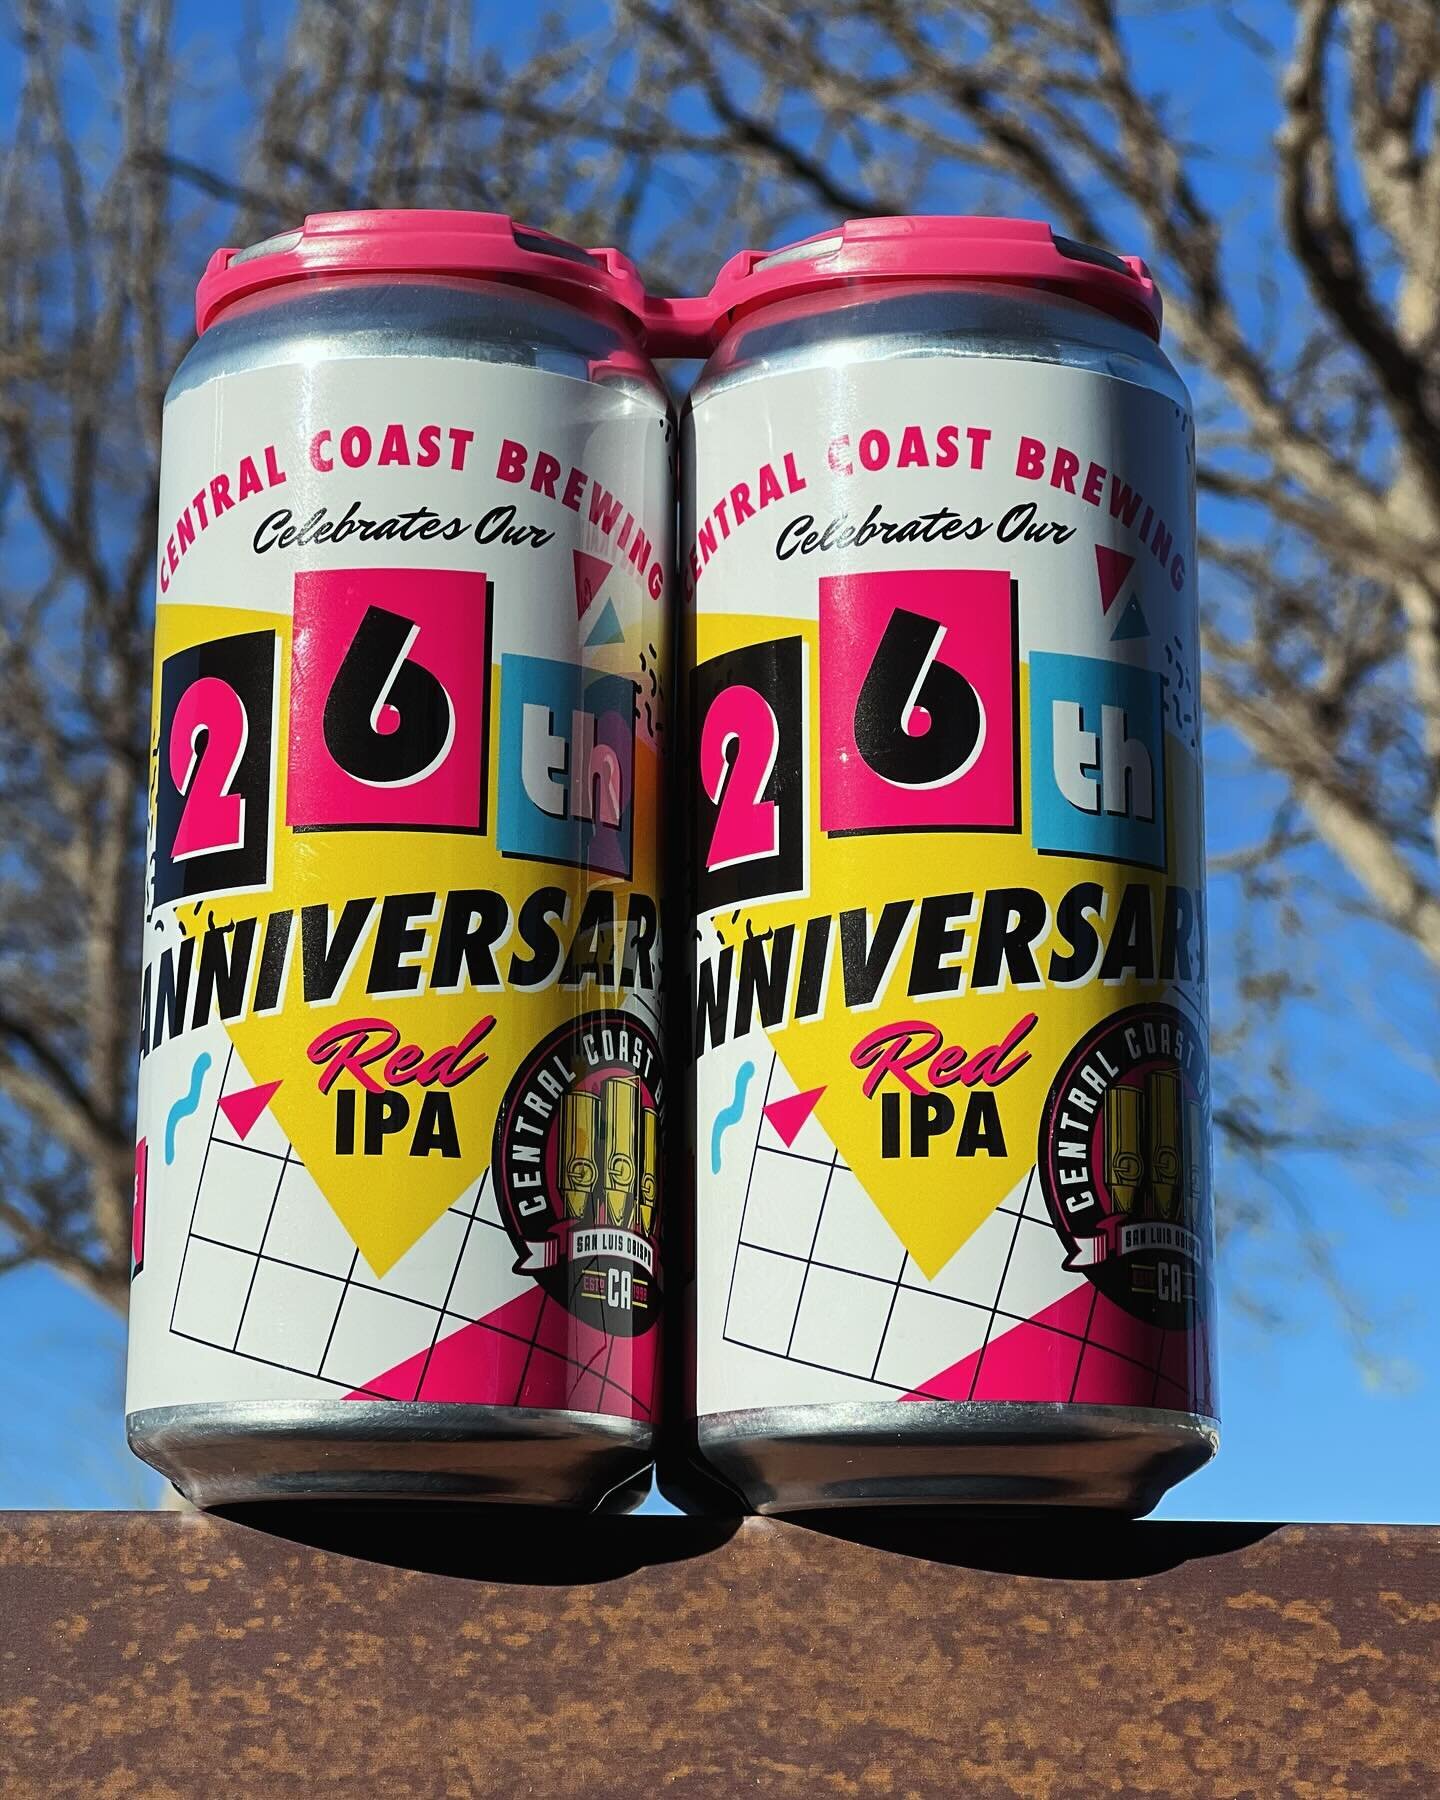 Most people only need one reason to be at the CCB 26th Anniversary Parties, but we&rsquo;re giving you four. The very limited Anniversary beer is a drinkable and refreshing Red IPA.  Available only at Higuera and The HUB. Cheers!